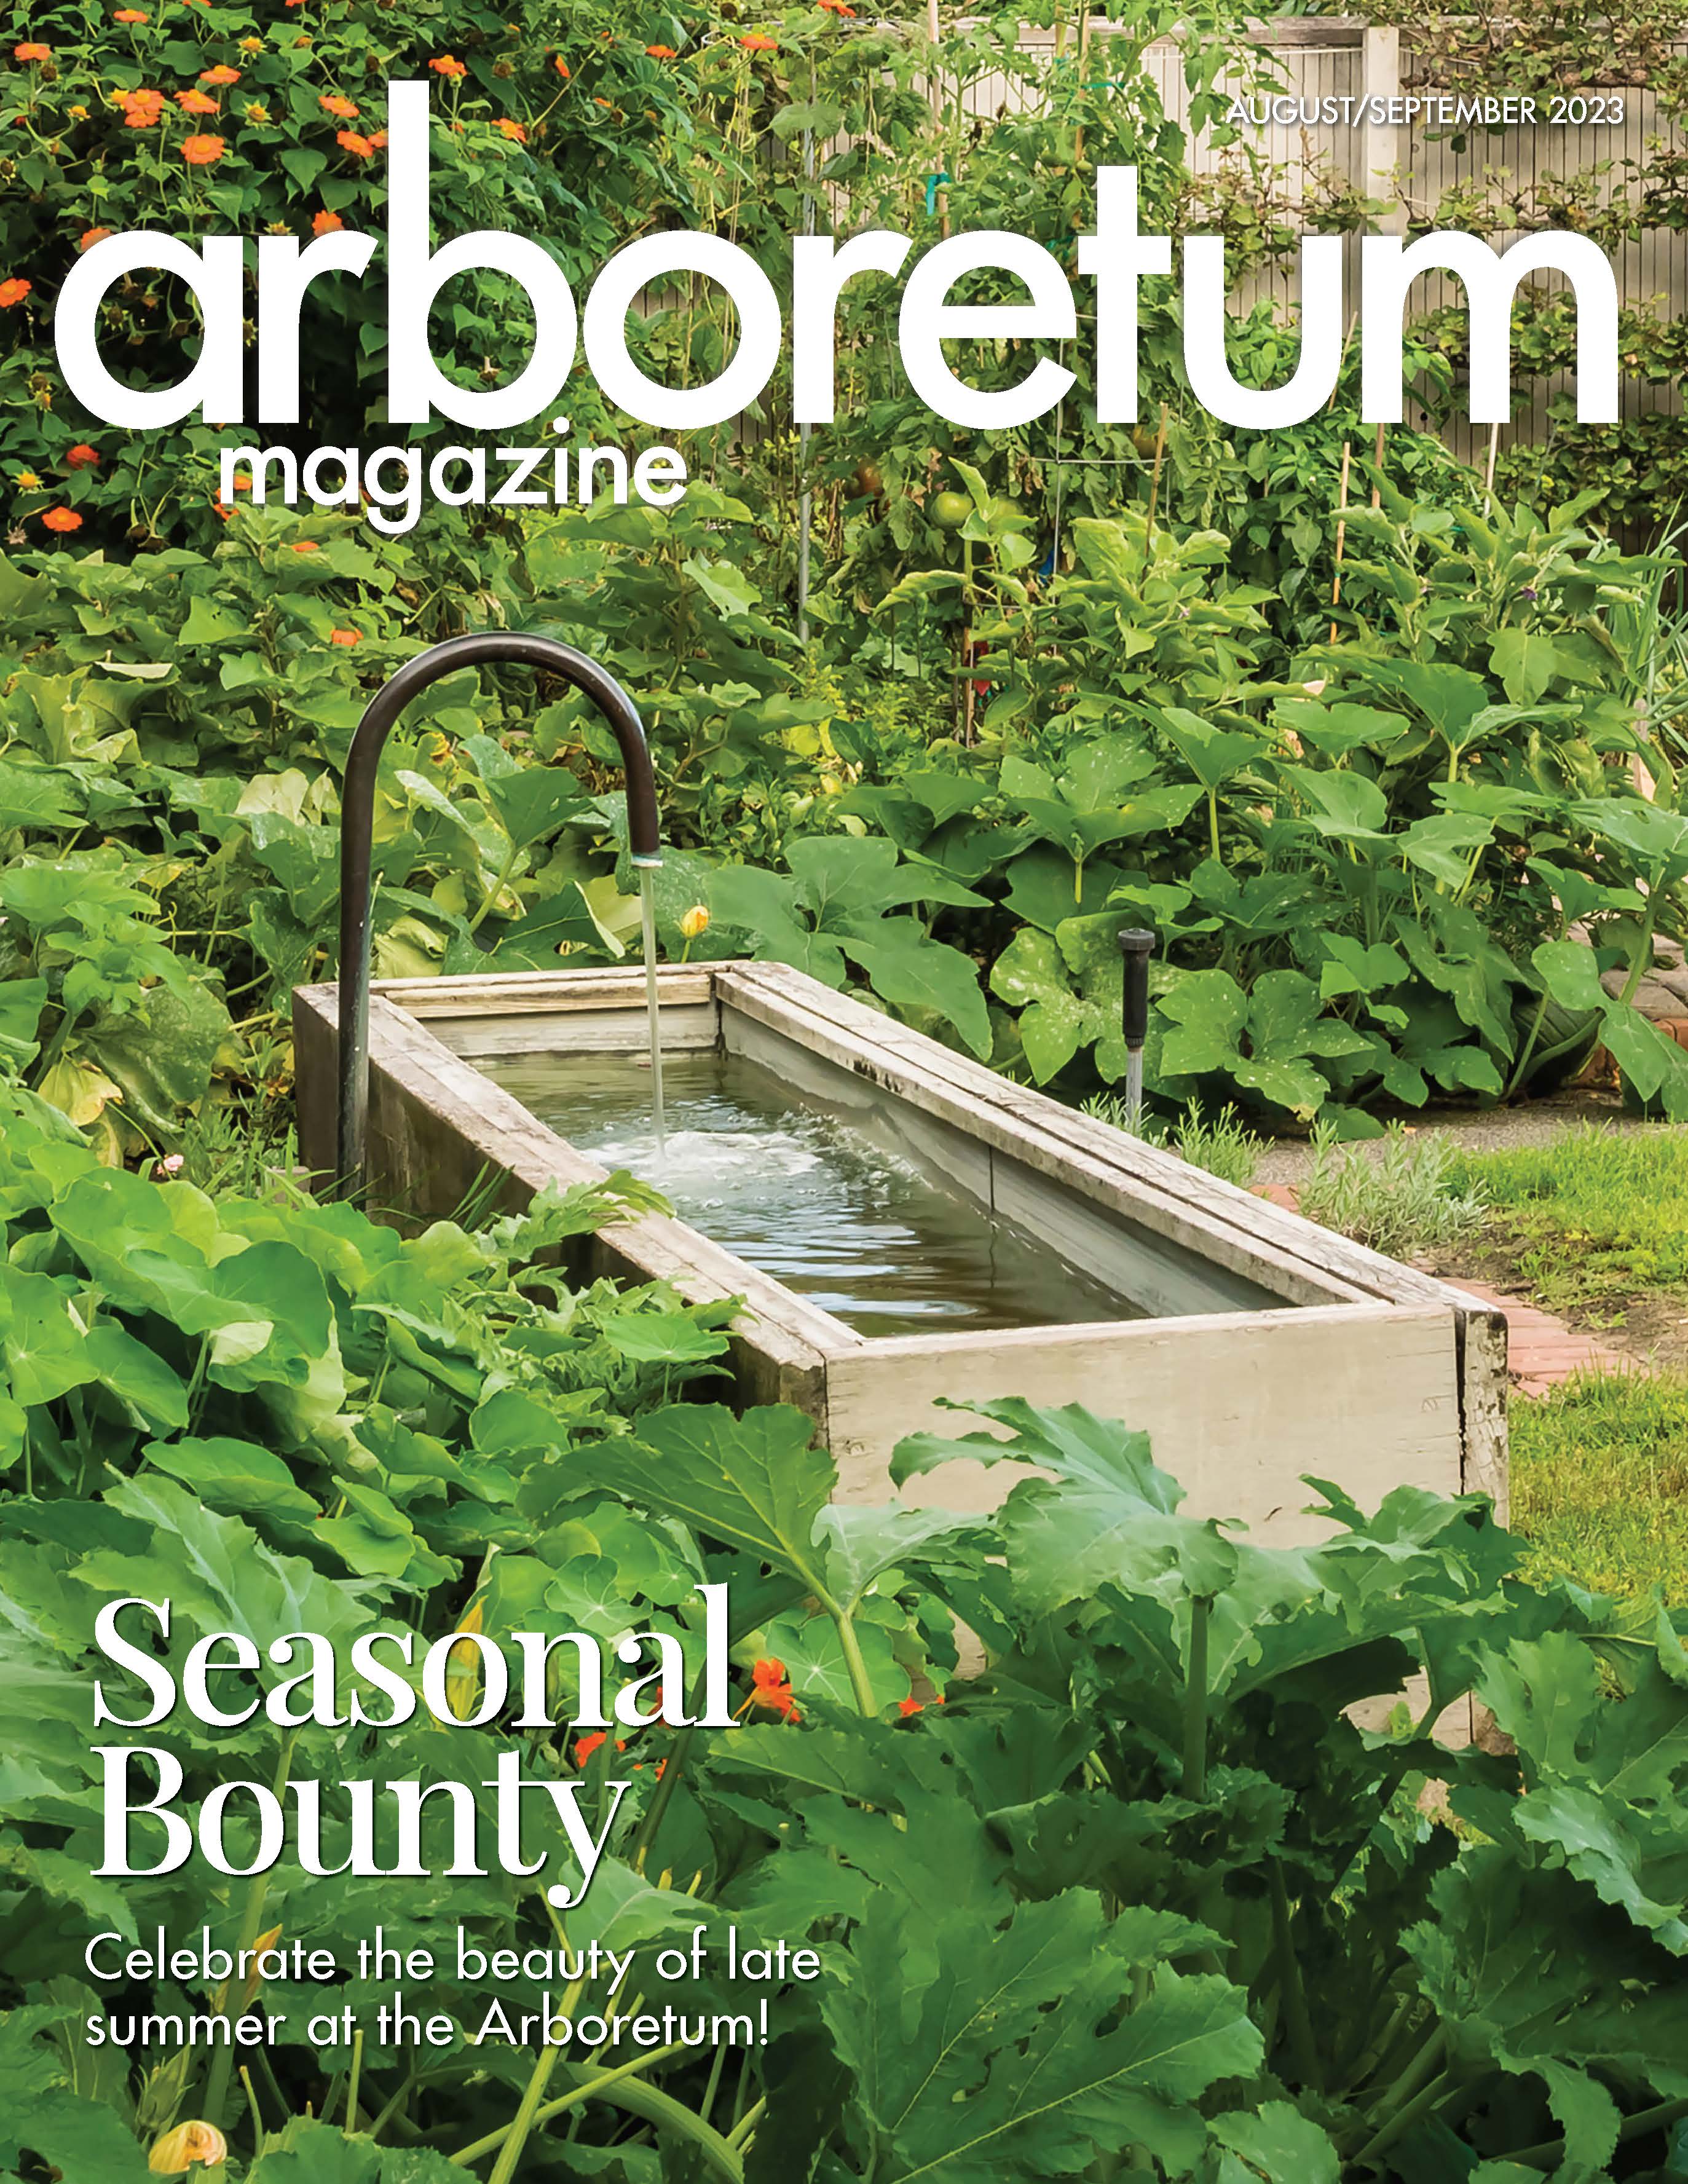 Cover of the august/sept magazine